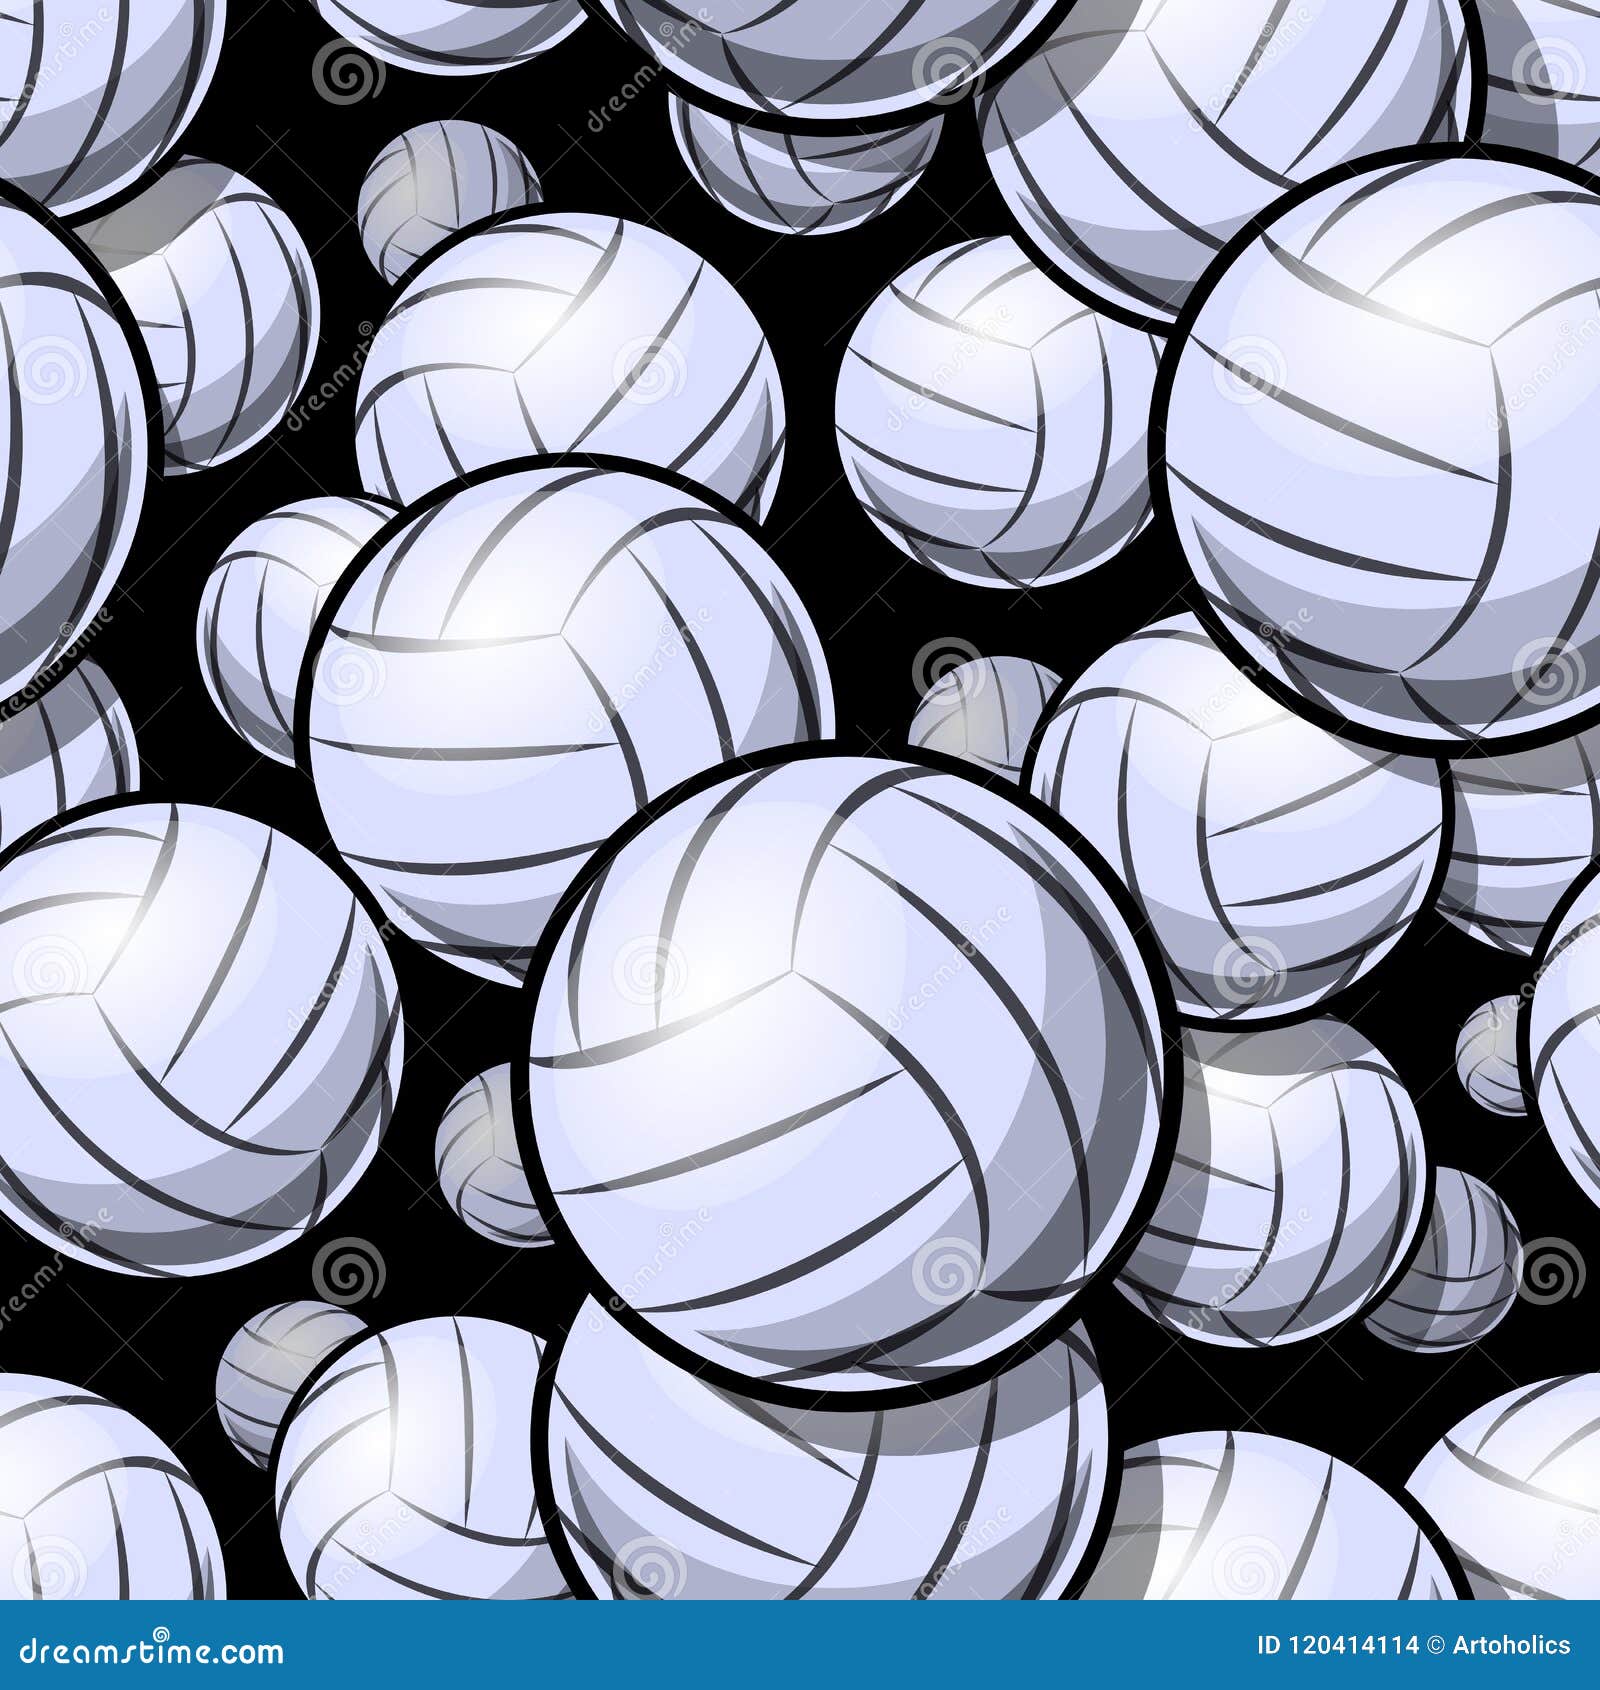 Volleyball HD wallpapers  Pxfuel